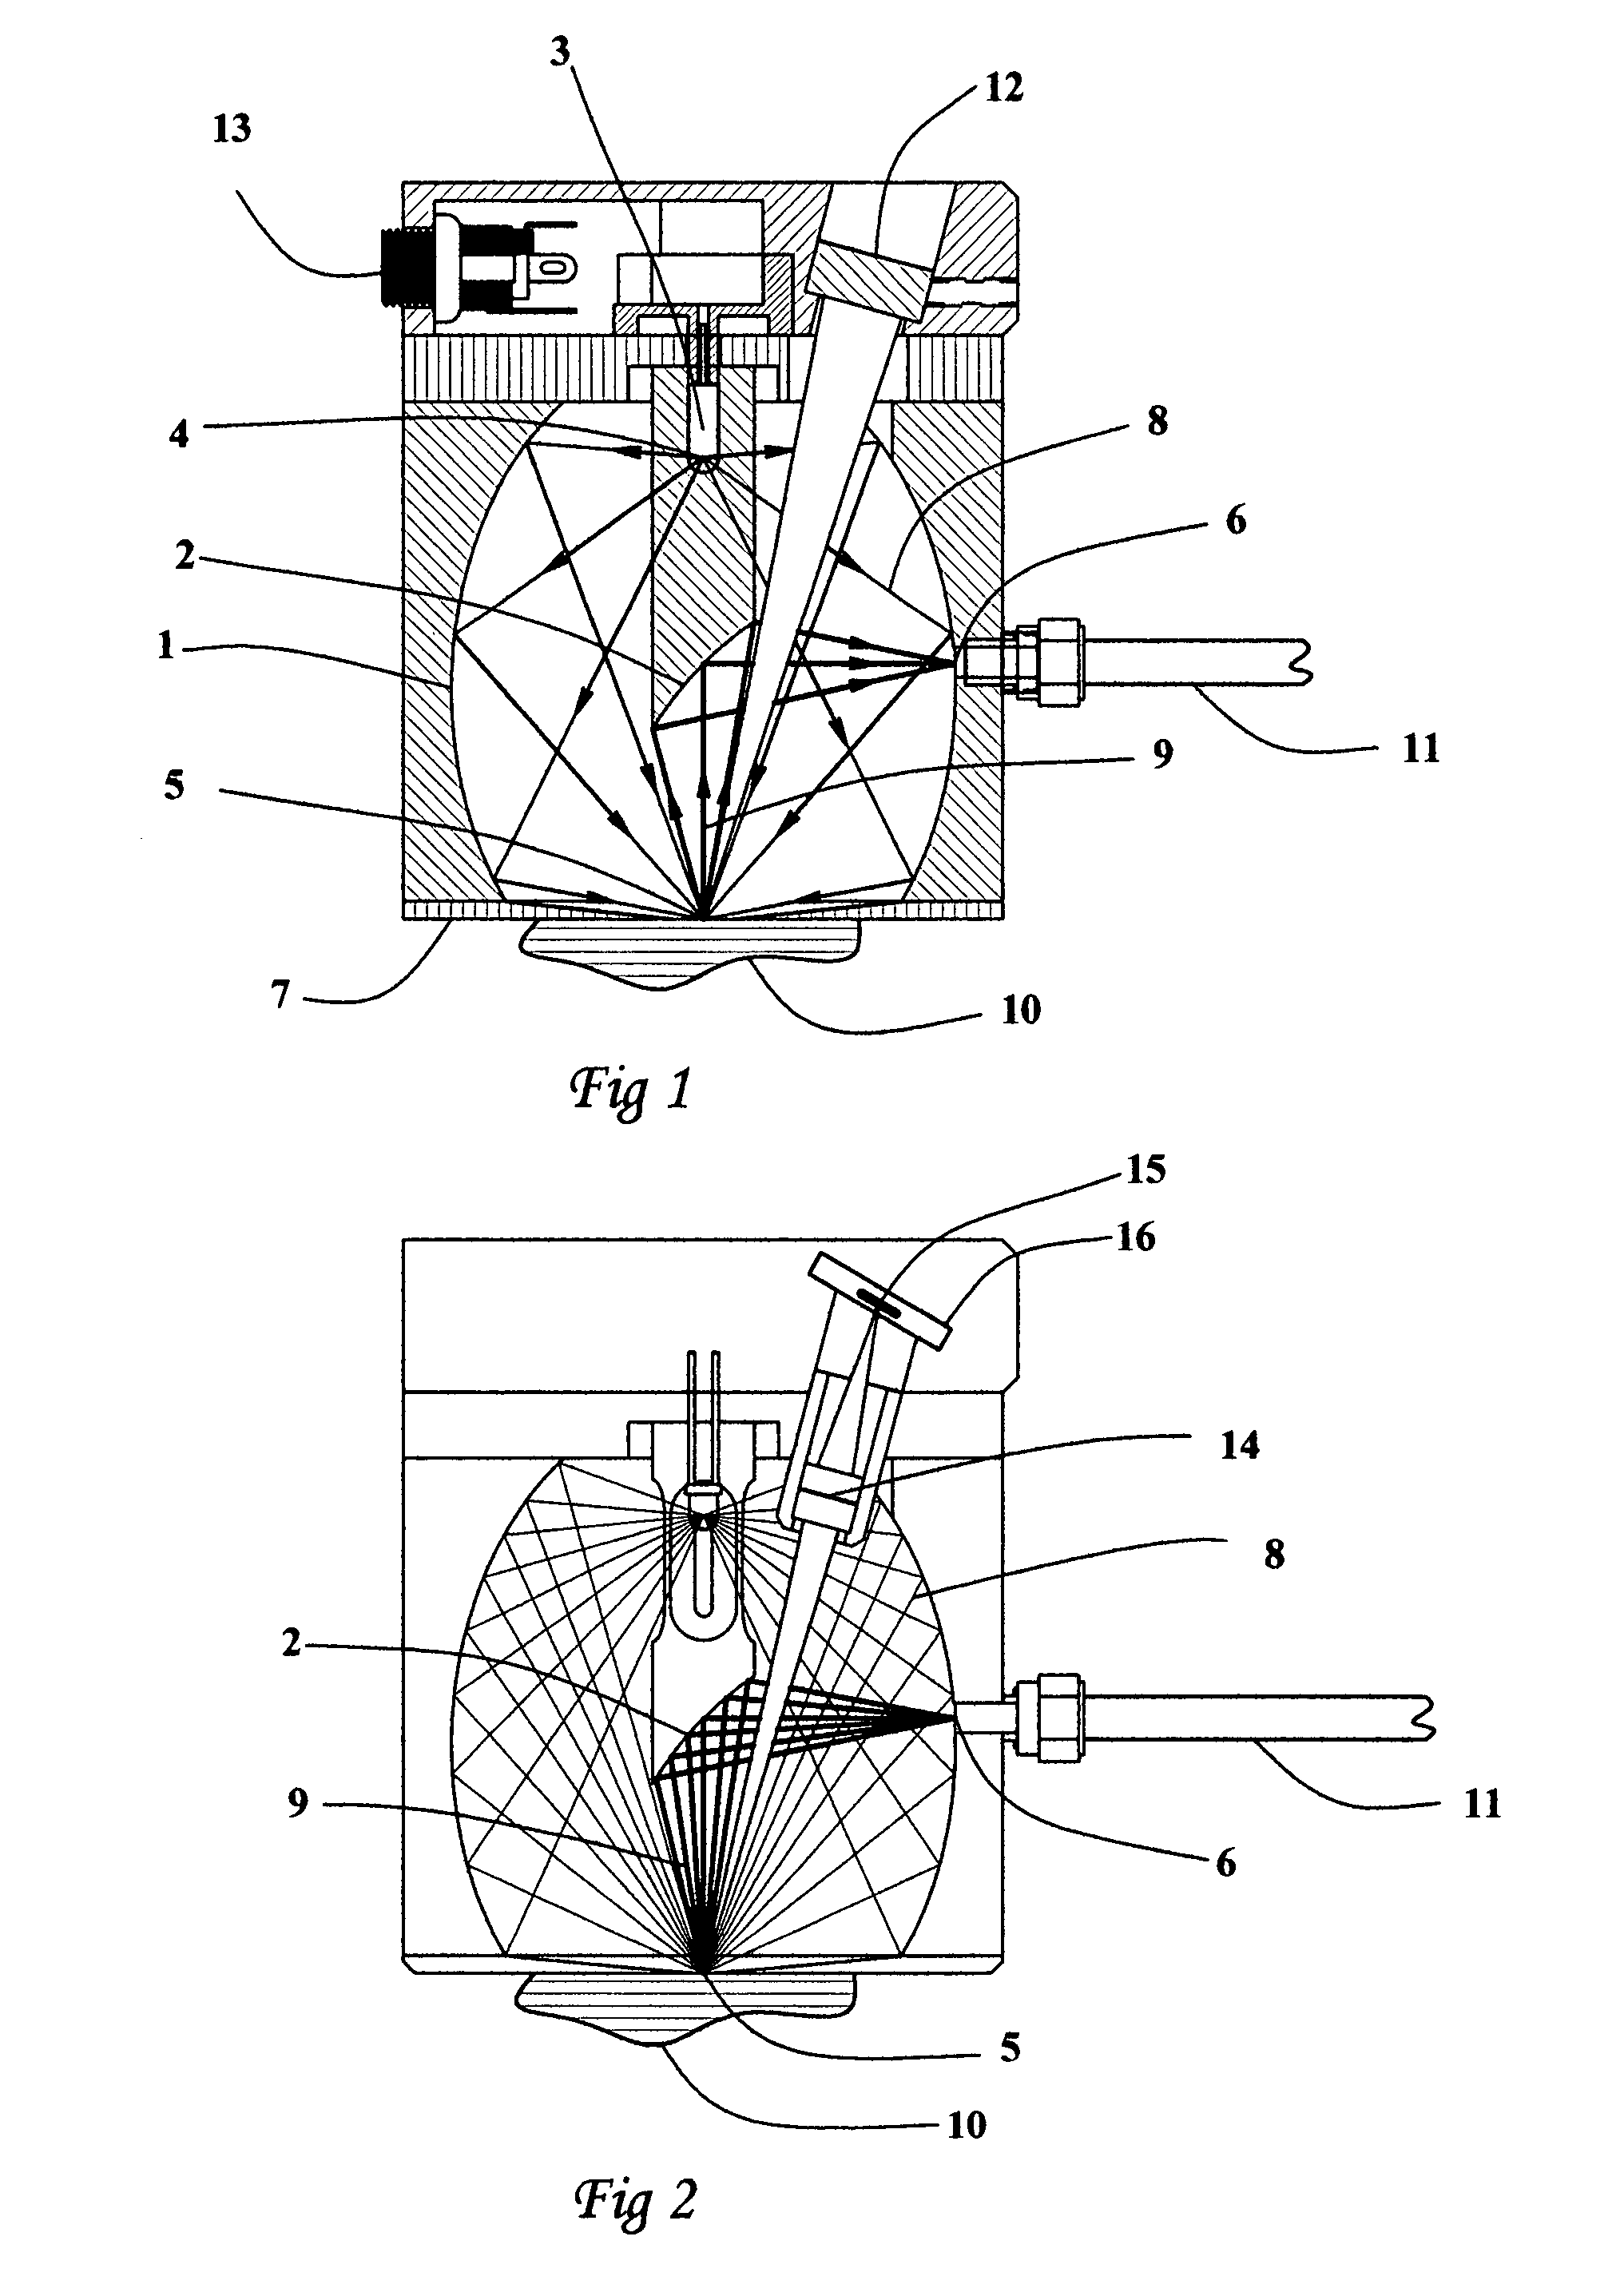 Device for small spot analysis using fiber optic interfaced spectrometers